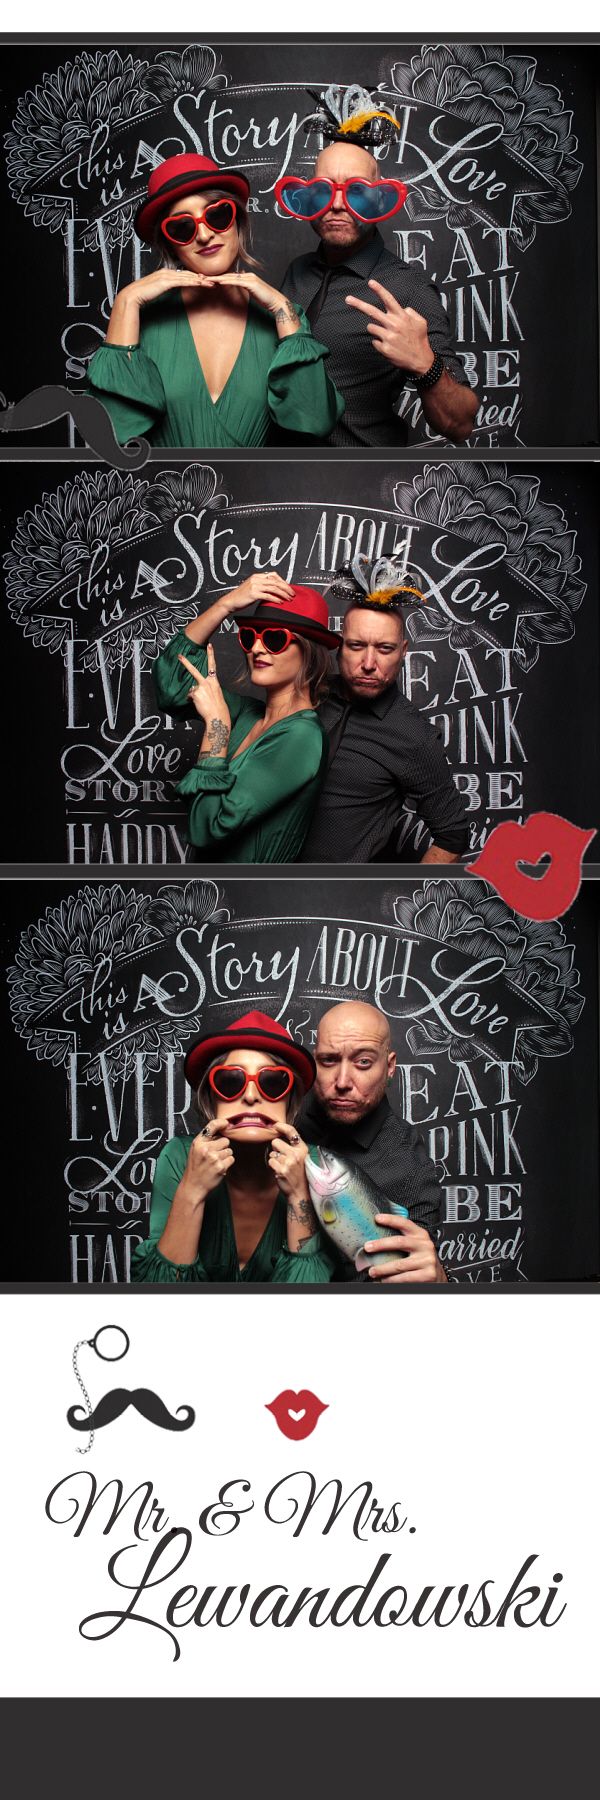 2x6 photo strip of couple posing with chalkboard backdrop and red hat